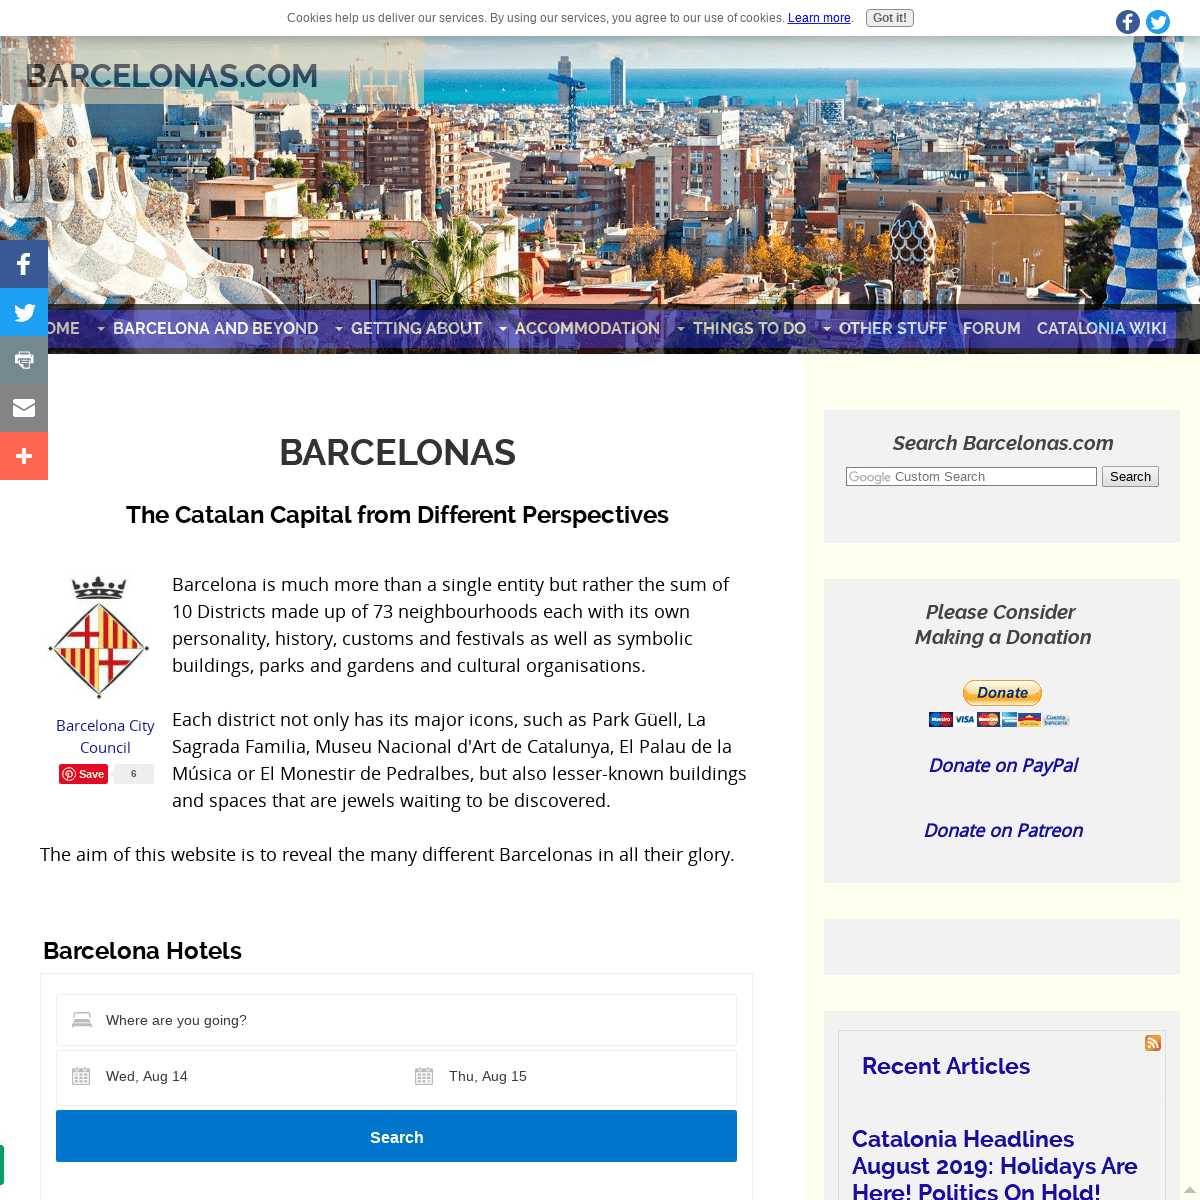 Barcelonas - The Catalan Capital From Different Perspectives